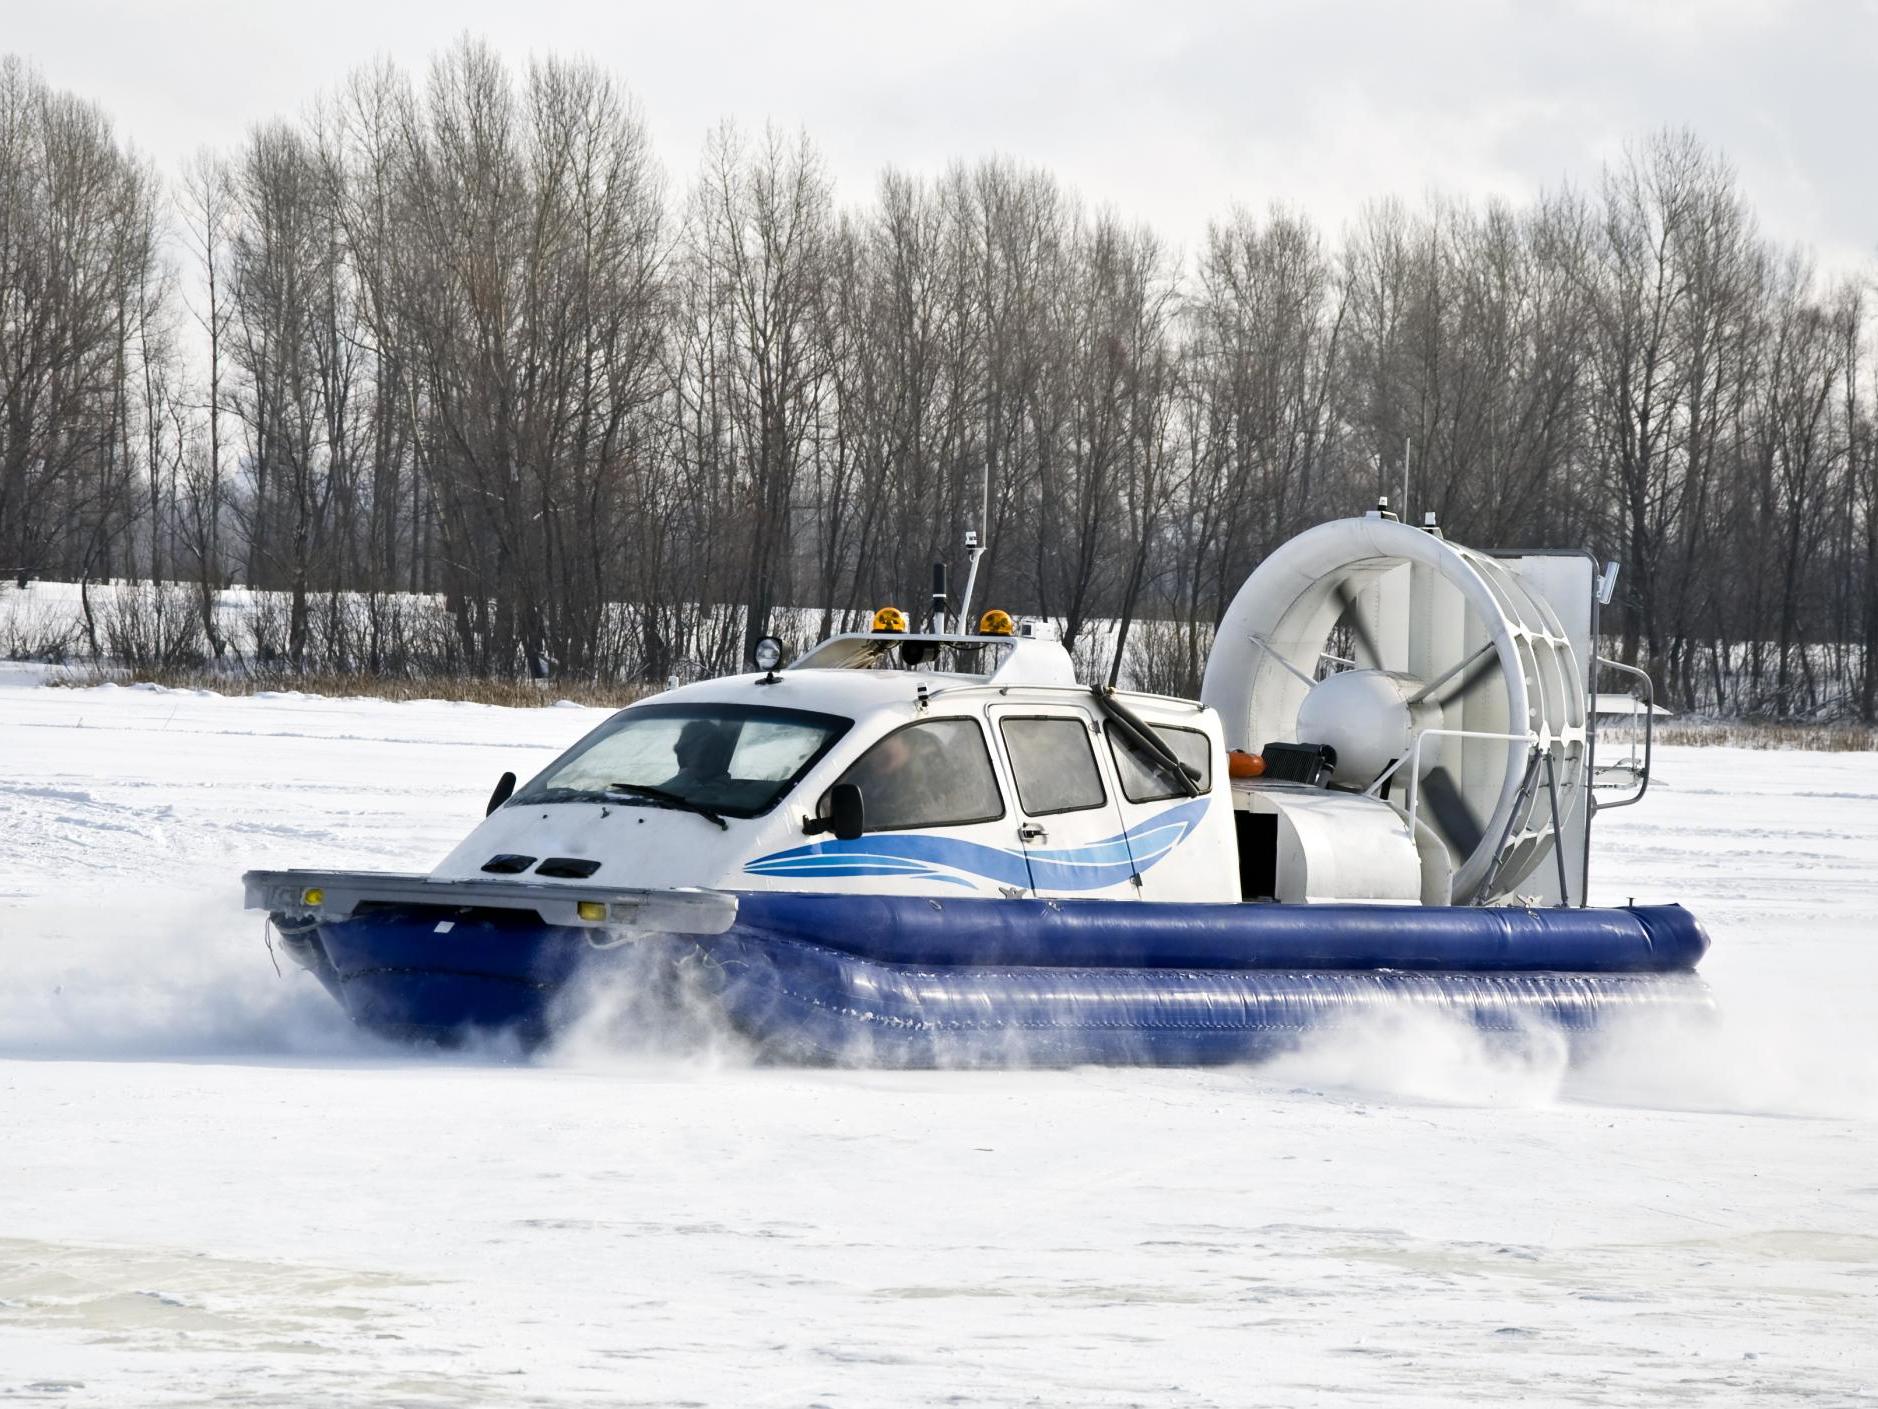 Stock image of a hovercraft on a frozen river. John Sturgeon has hunted moose from hovercraft for 40 years in Alaska and will be allowed to continue